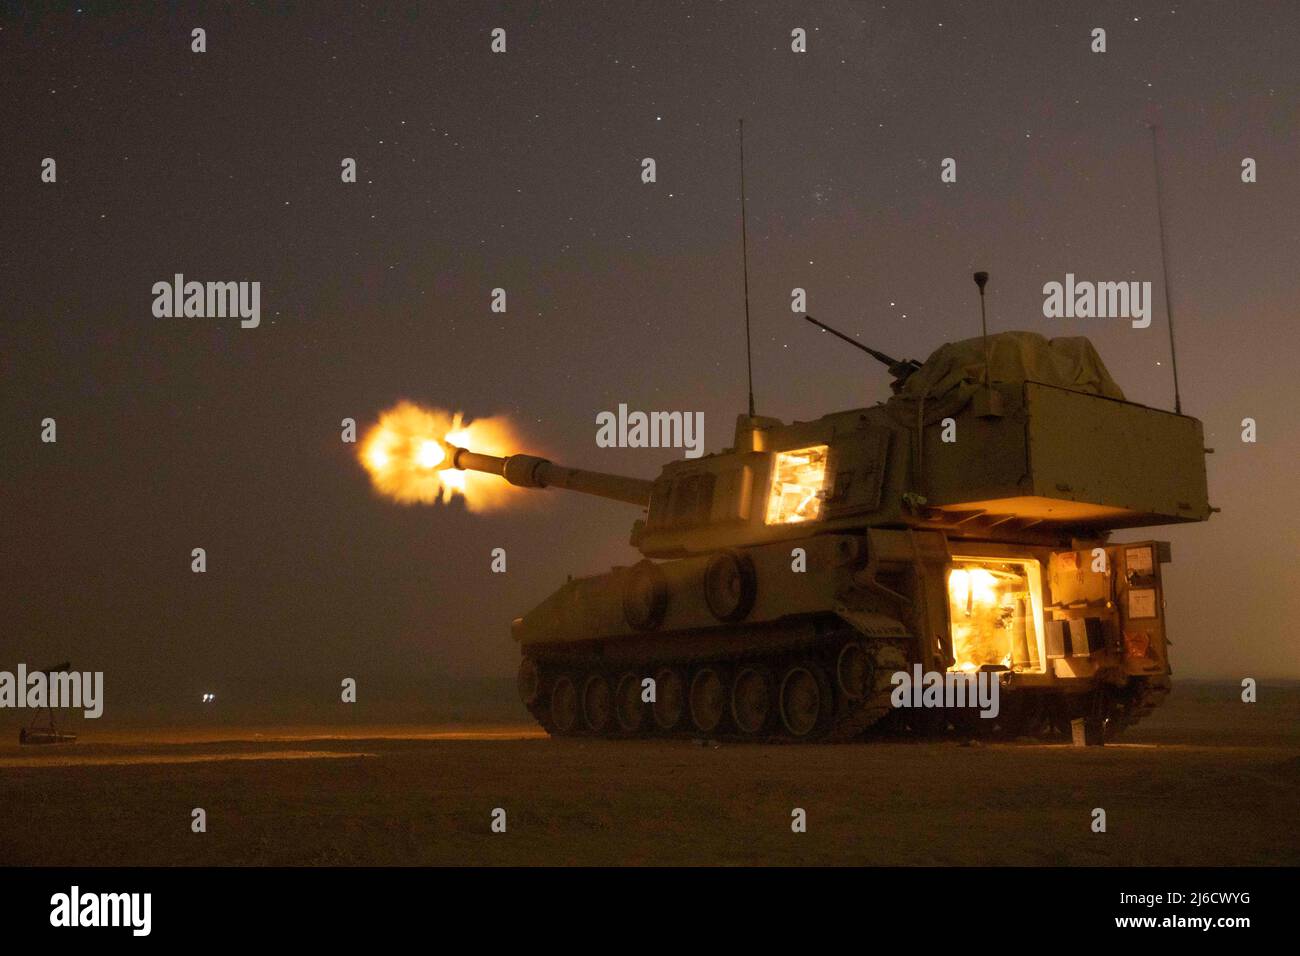 Training Area 1, Jordan. 27 August, 2019. U.S. Army soldiers with Alpha Battery, 3rd Battalion, 29th Field Artillery Regiment, 4th Infantry Division, fire a M109A6 Paladin self-propelled howitzer in support of the joint training exercise Eager Lion, August 27, 2029 in Jordan.  Credit: Spc. Angel Ruszkiewicz/US Army Photo/Alamy Live News Stock Photo